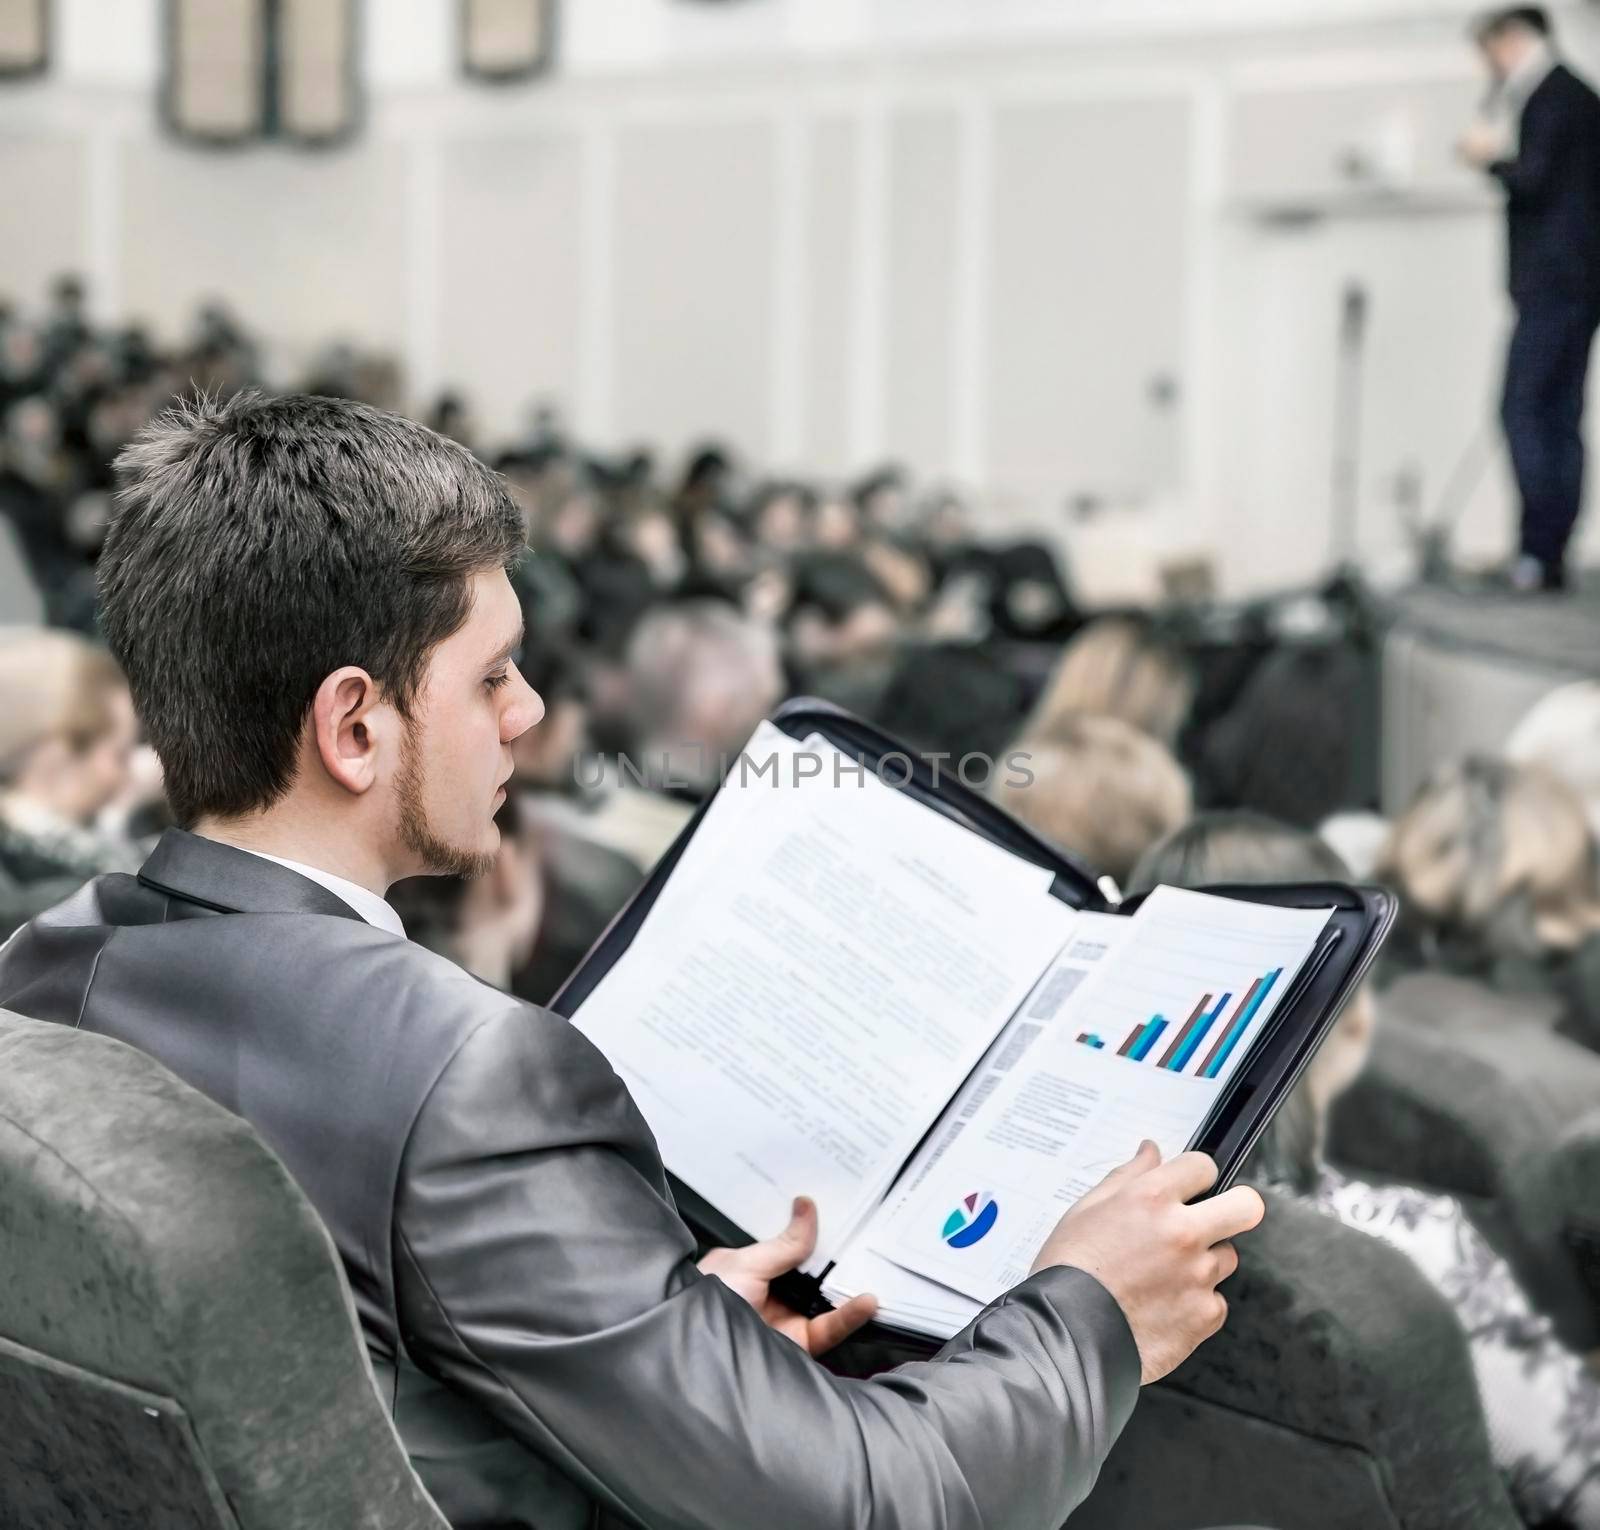 in the foreground: a businessman on a business conference. business training